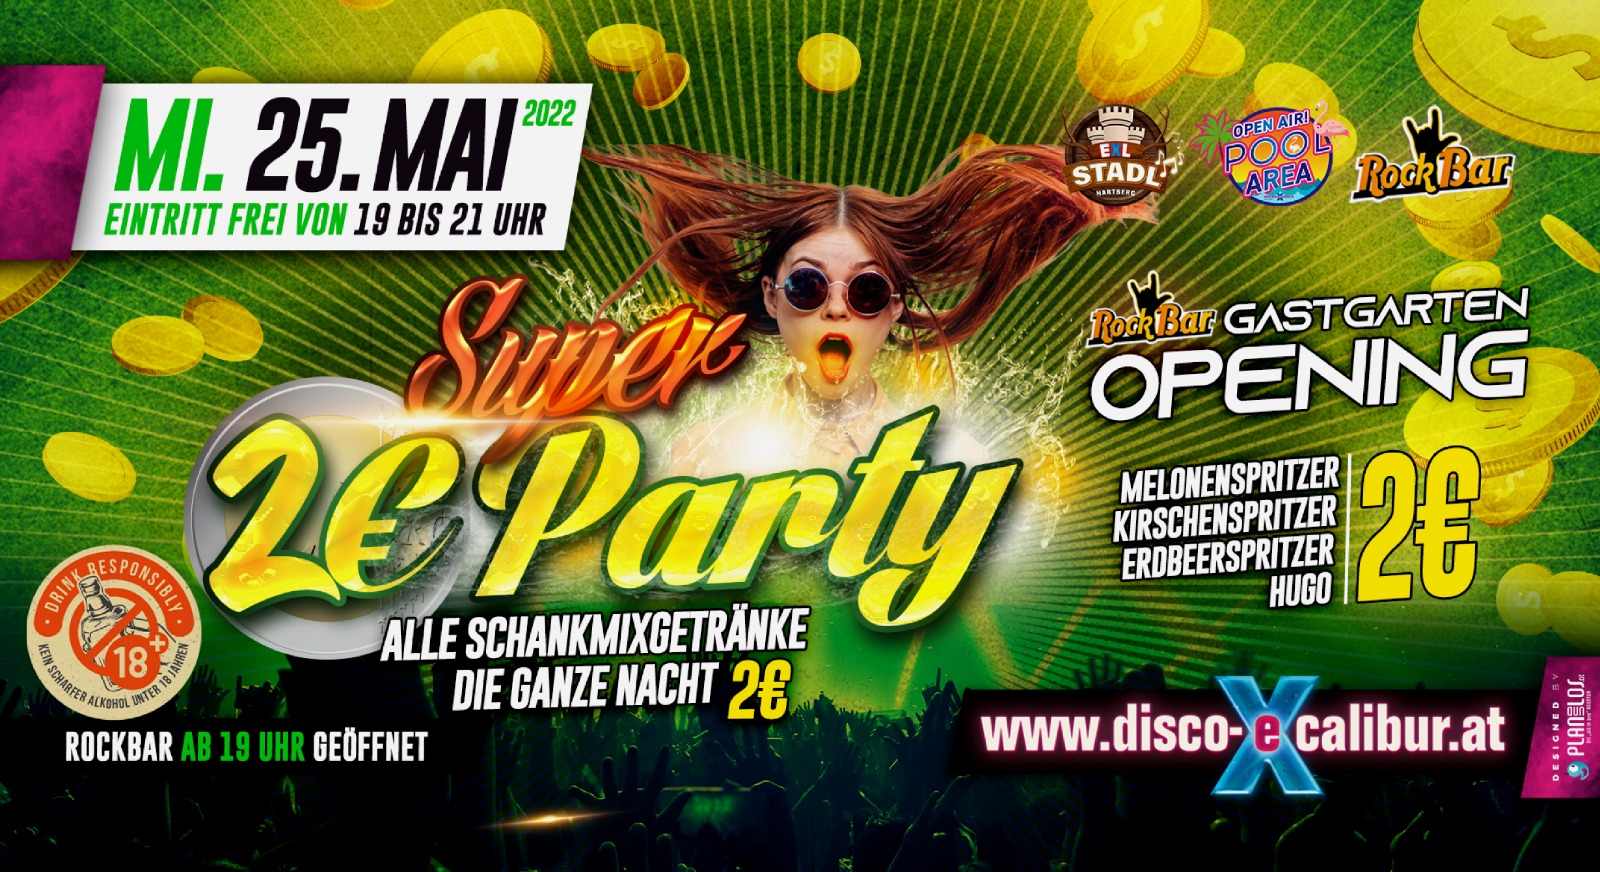 2€ Party